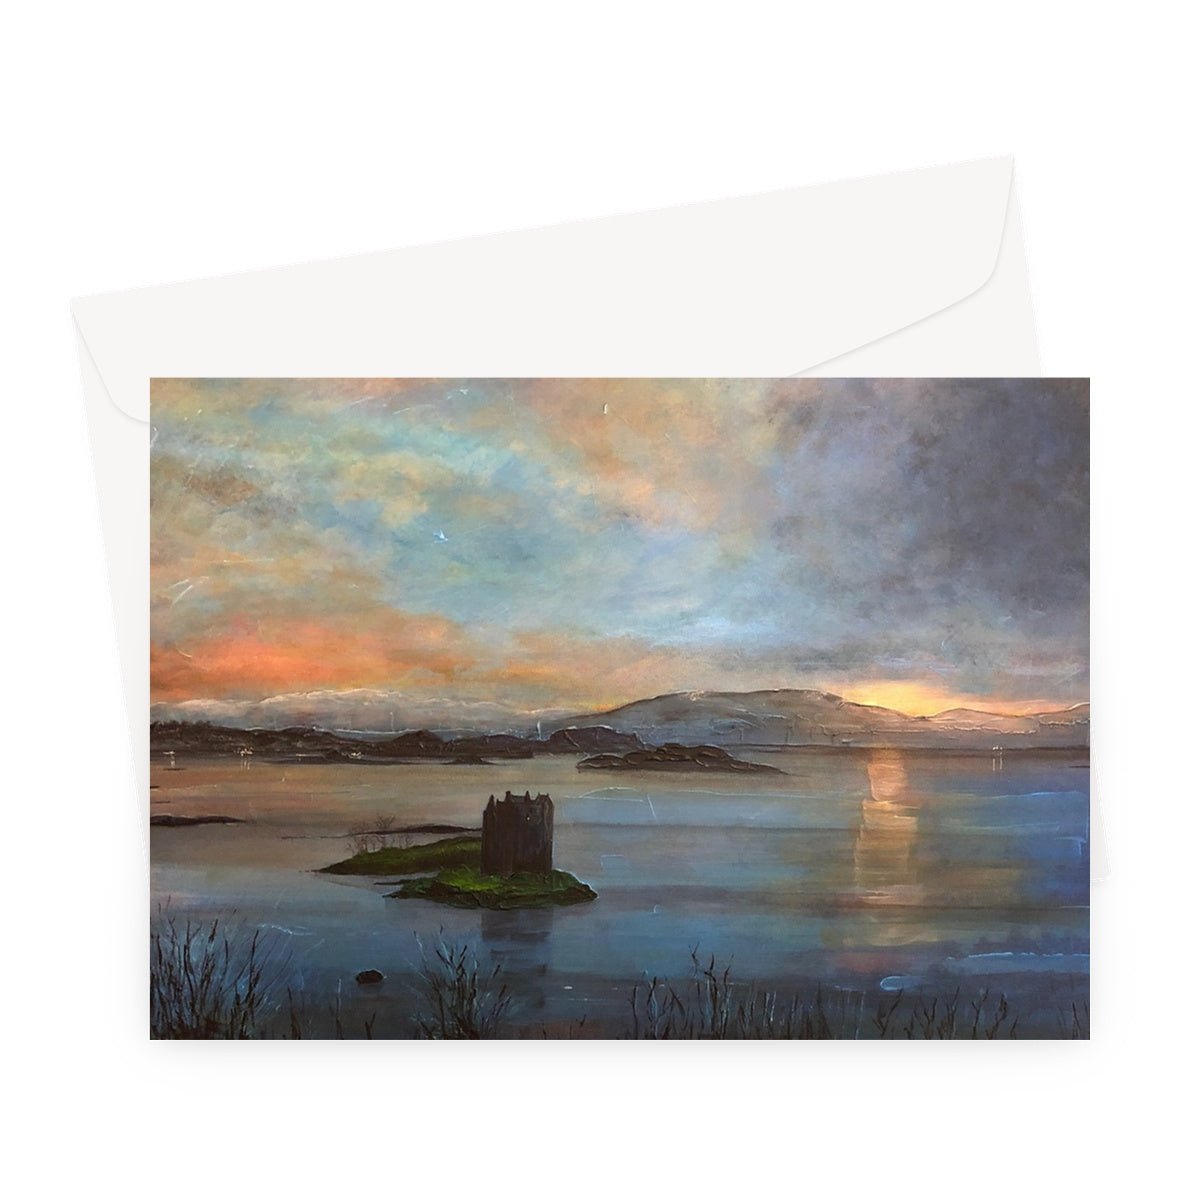 Castle Stalker Twilight Art Gifts Greeting Card-Greetings Cards-Scottish Castles Art Gallery-A5 Landscape-10 Cards-Paintings, Prints, Homeware, Art Gifts From Scotland By Scottish Artist Kevin Hunter